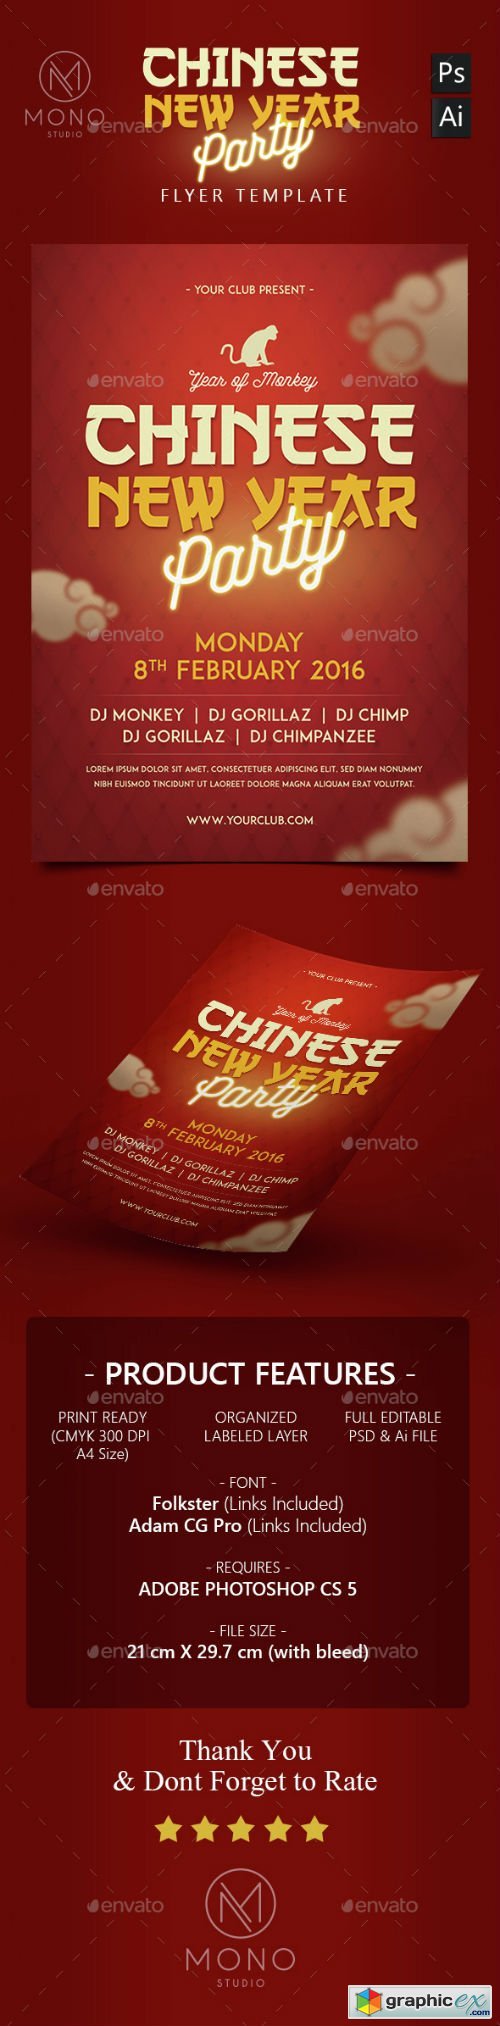 Chinese New Year Flyer 14556635